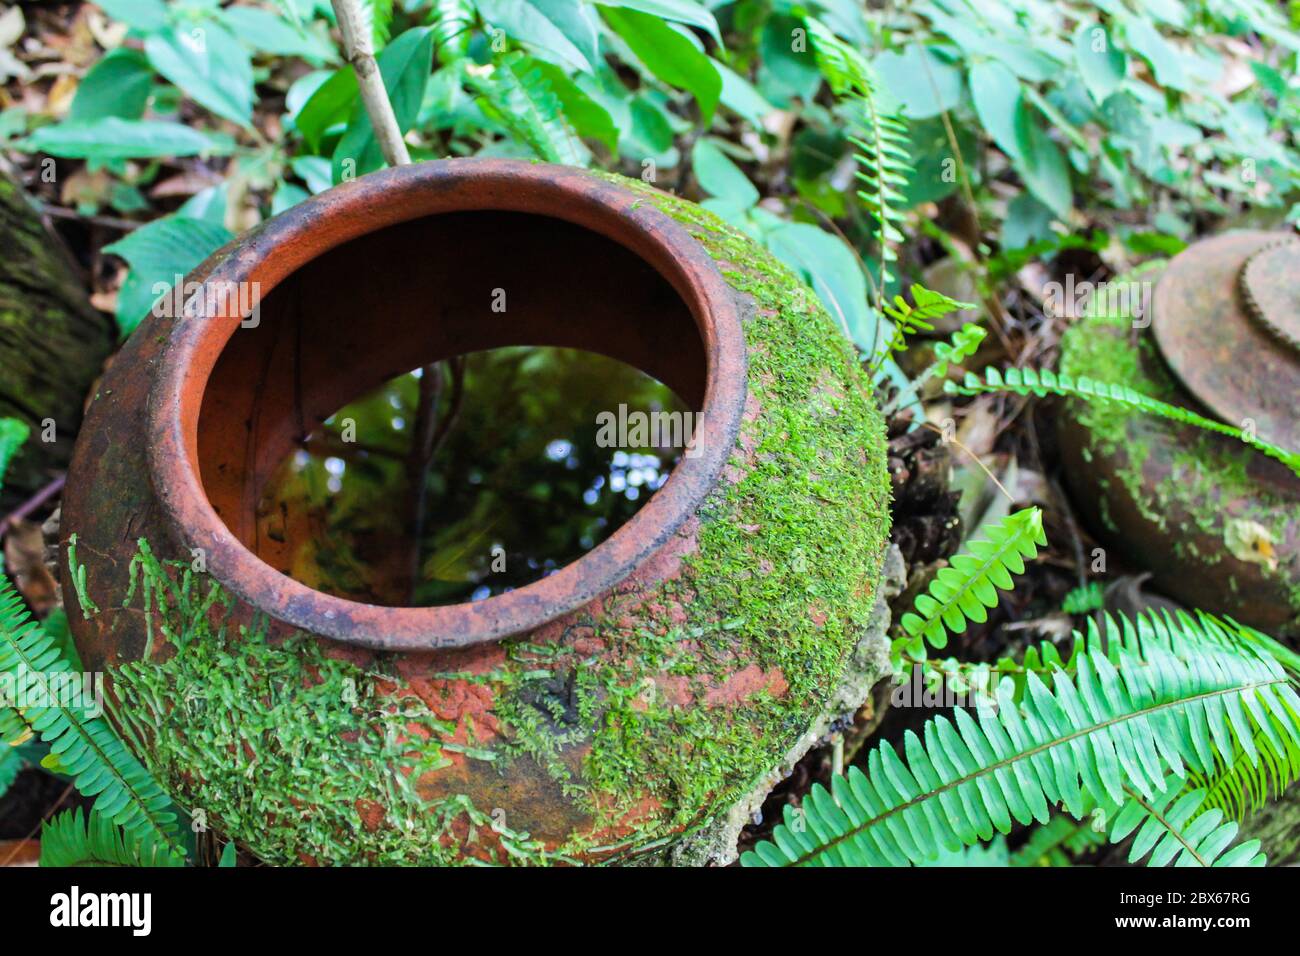 Bright green moss and fern growing on earthen jar in the garden. Select focus. Stock Photo